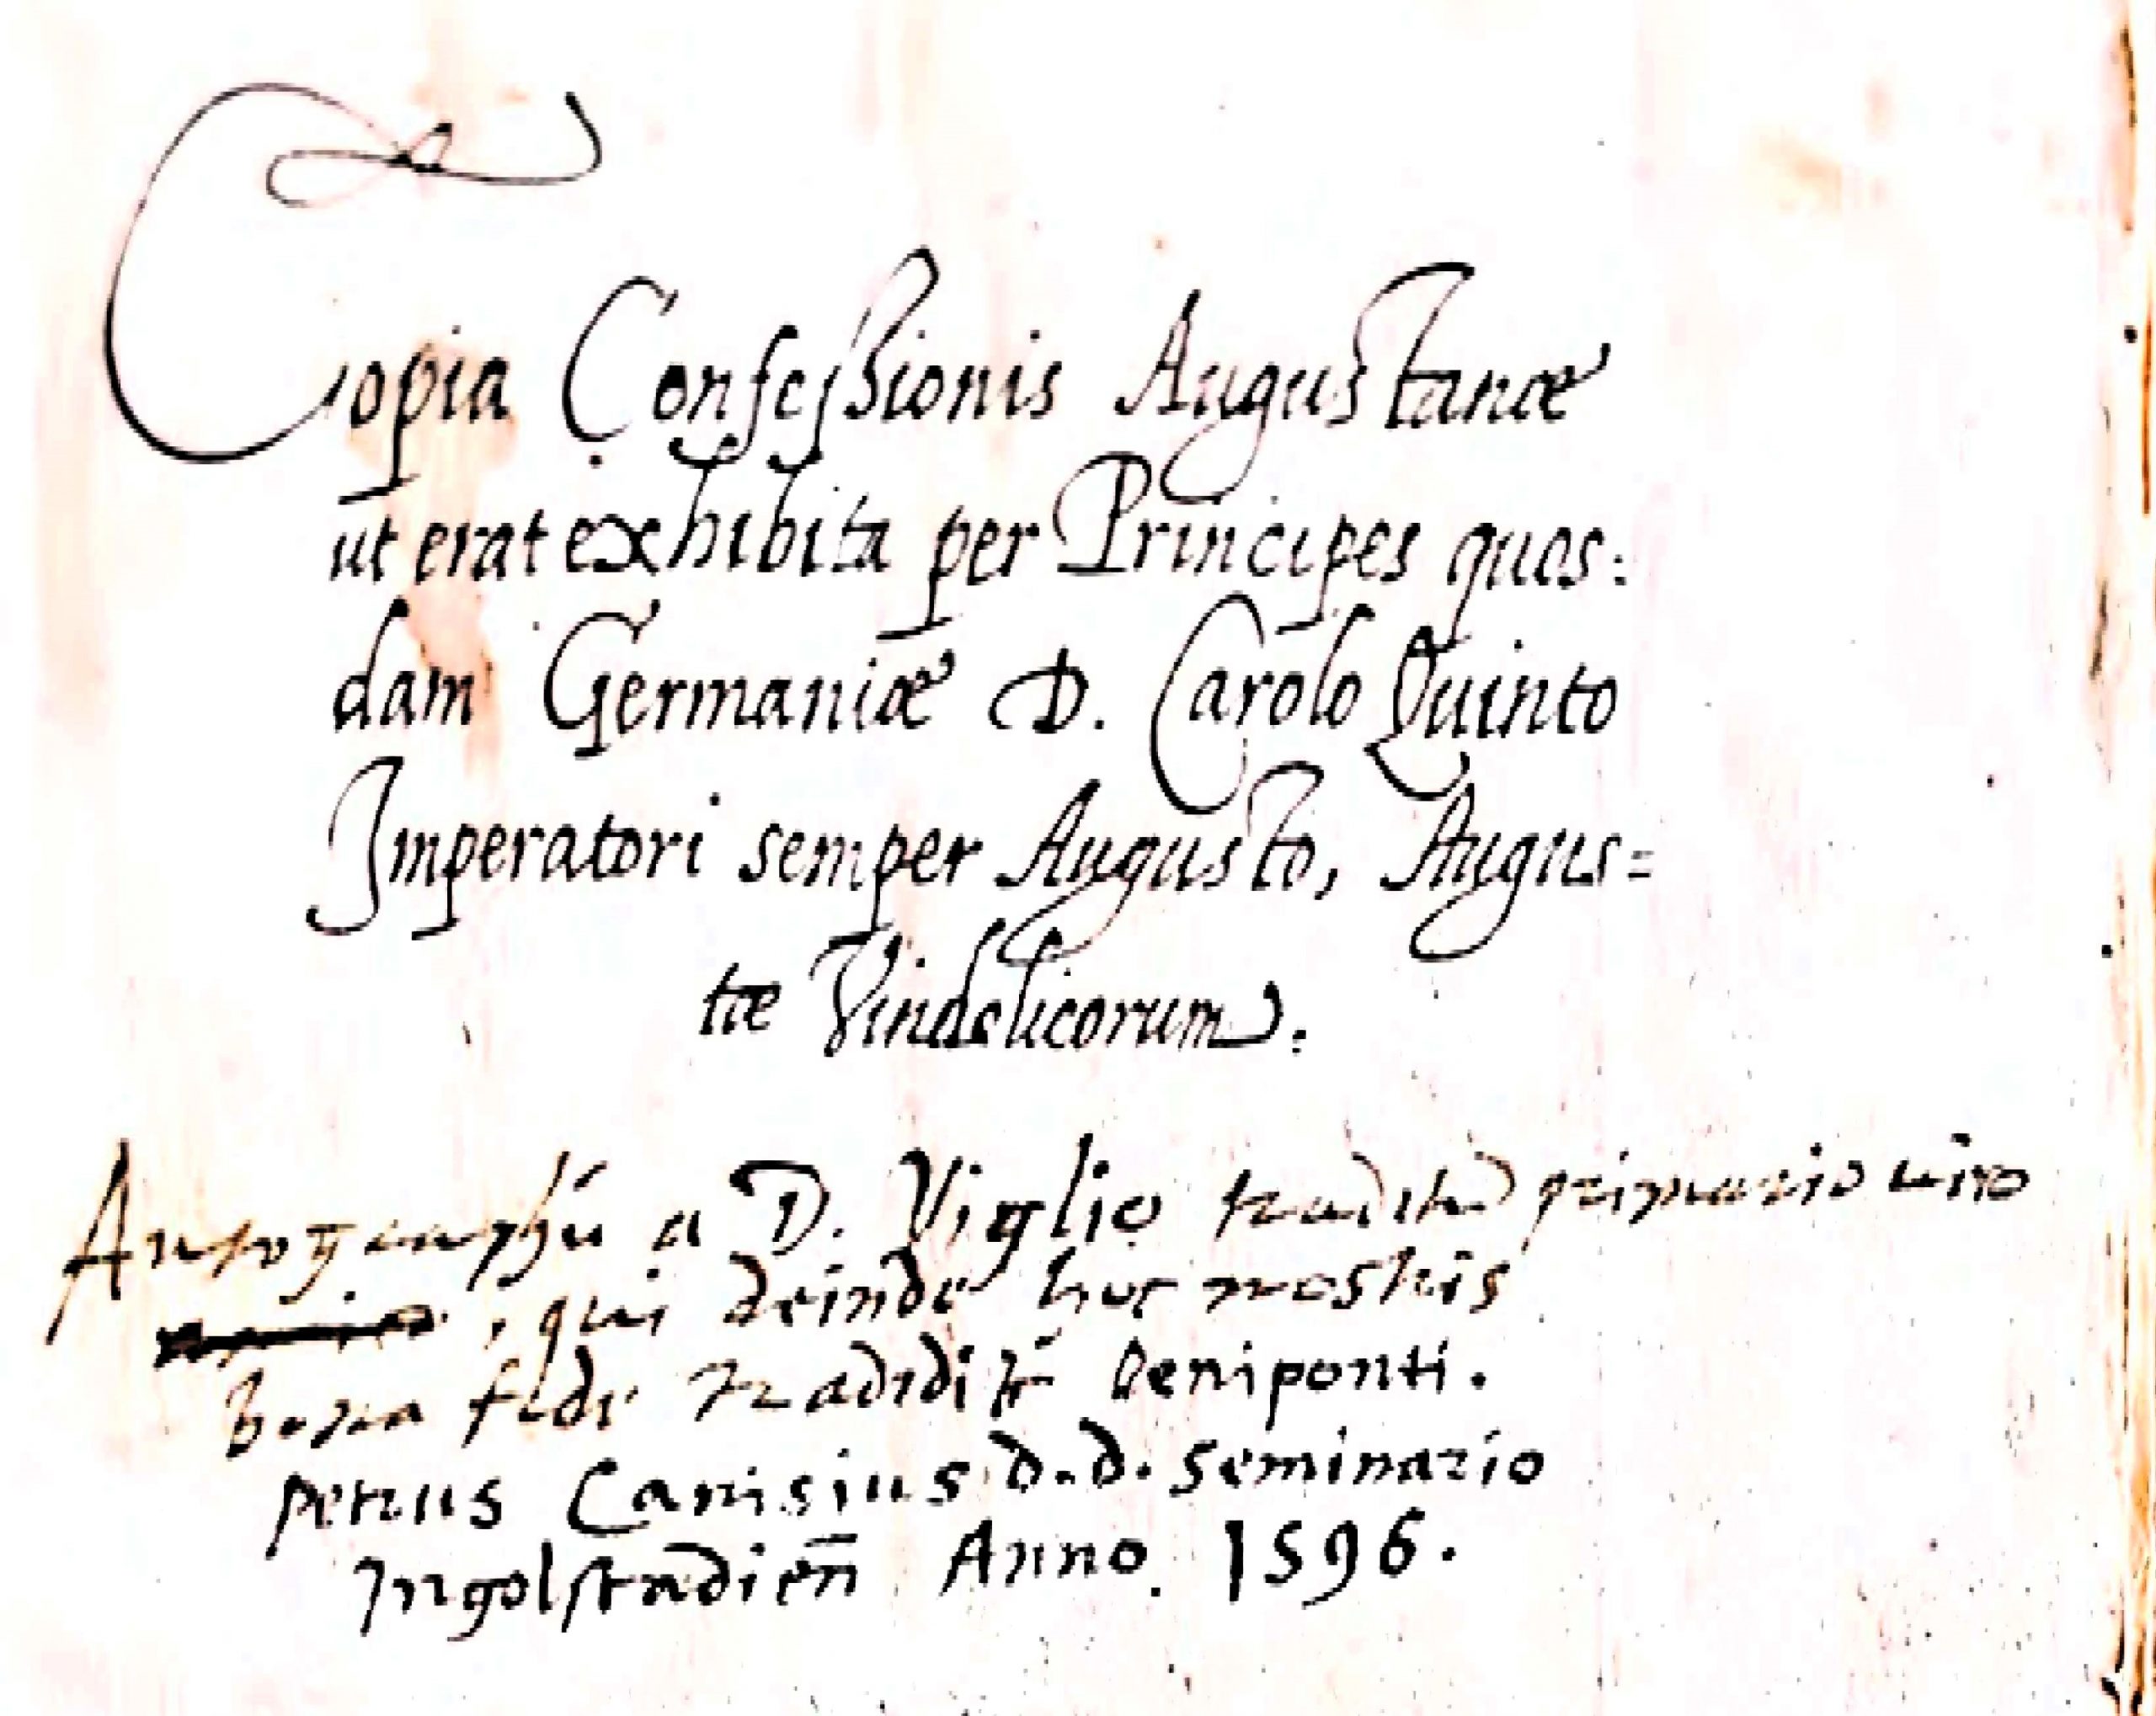 New course on 16th century paleography and early modern German